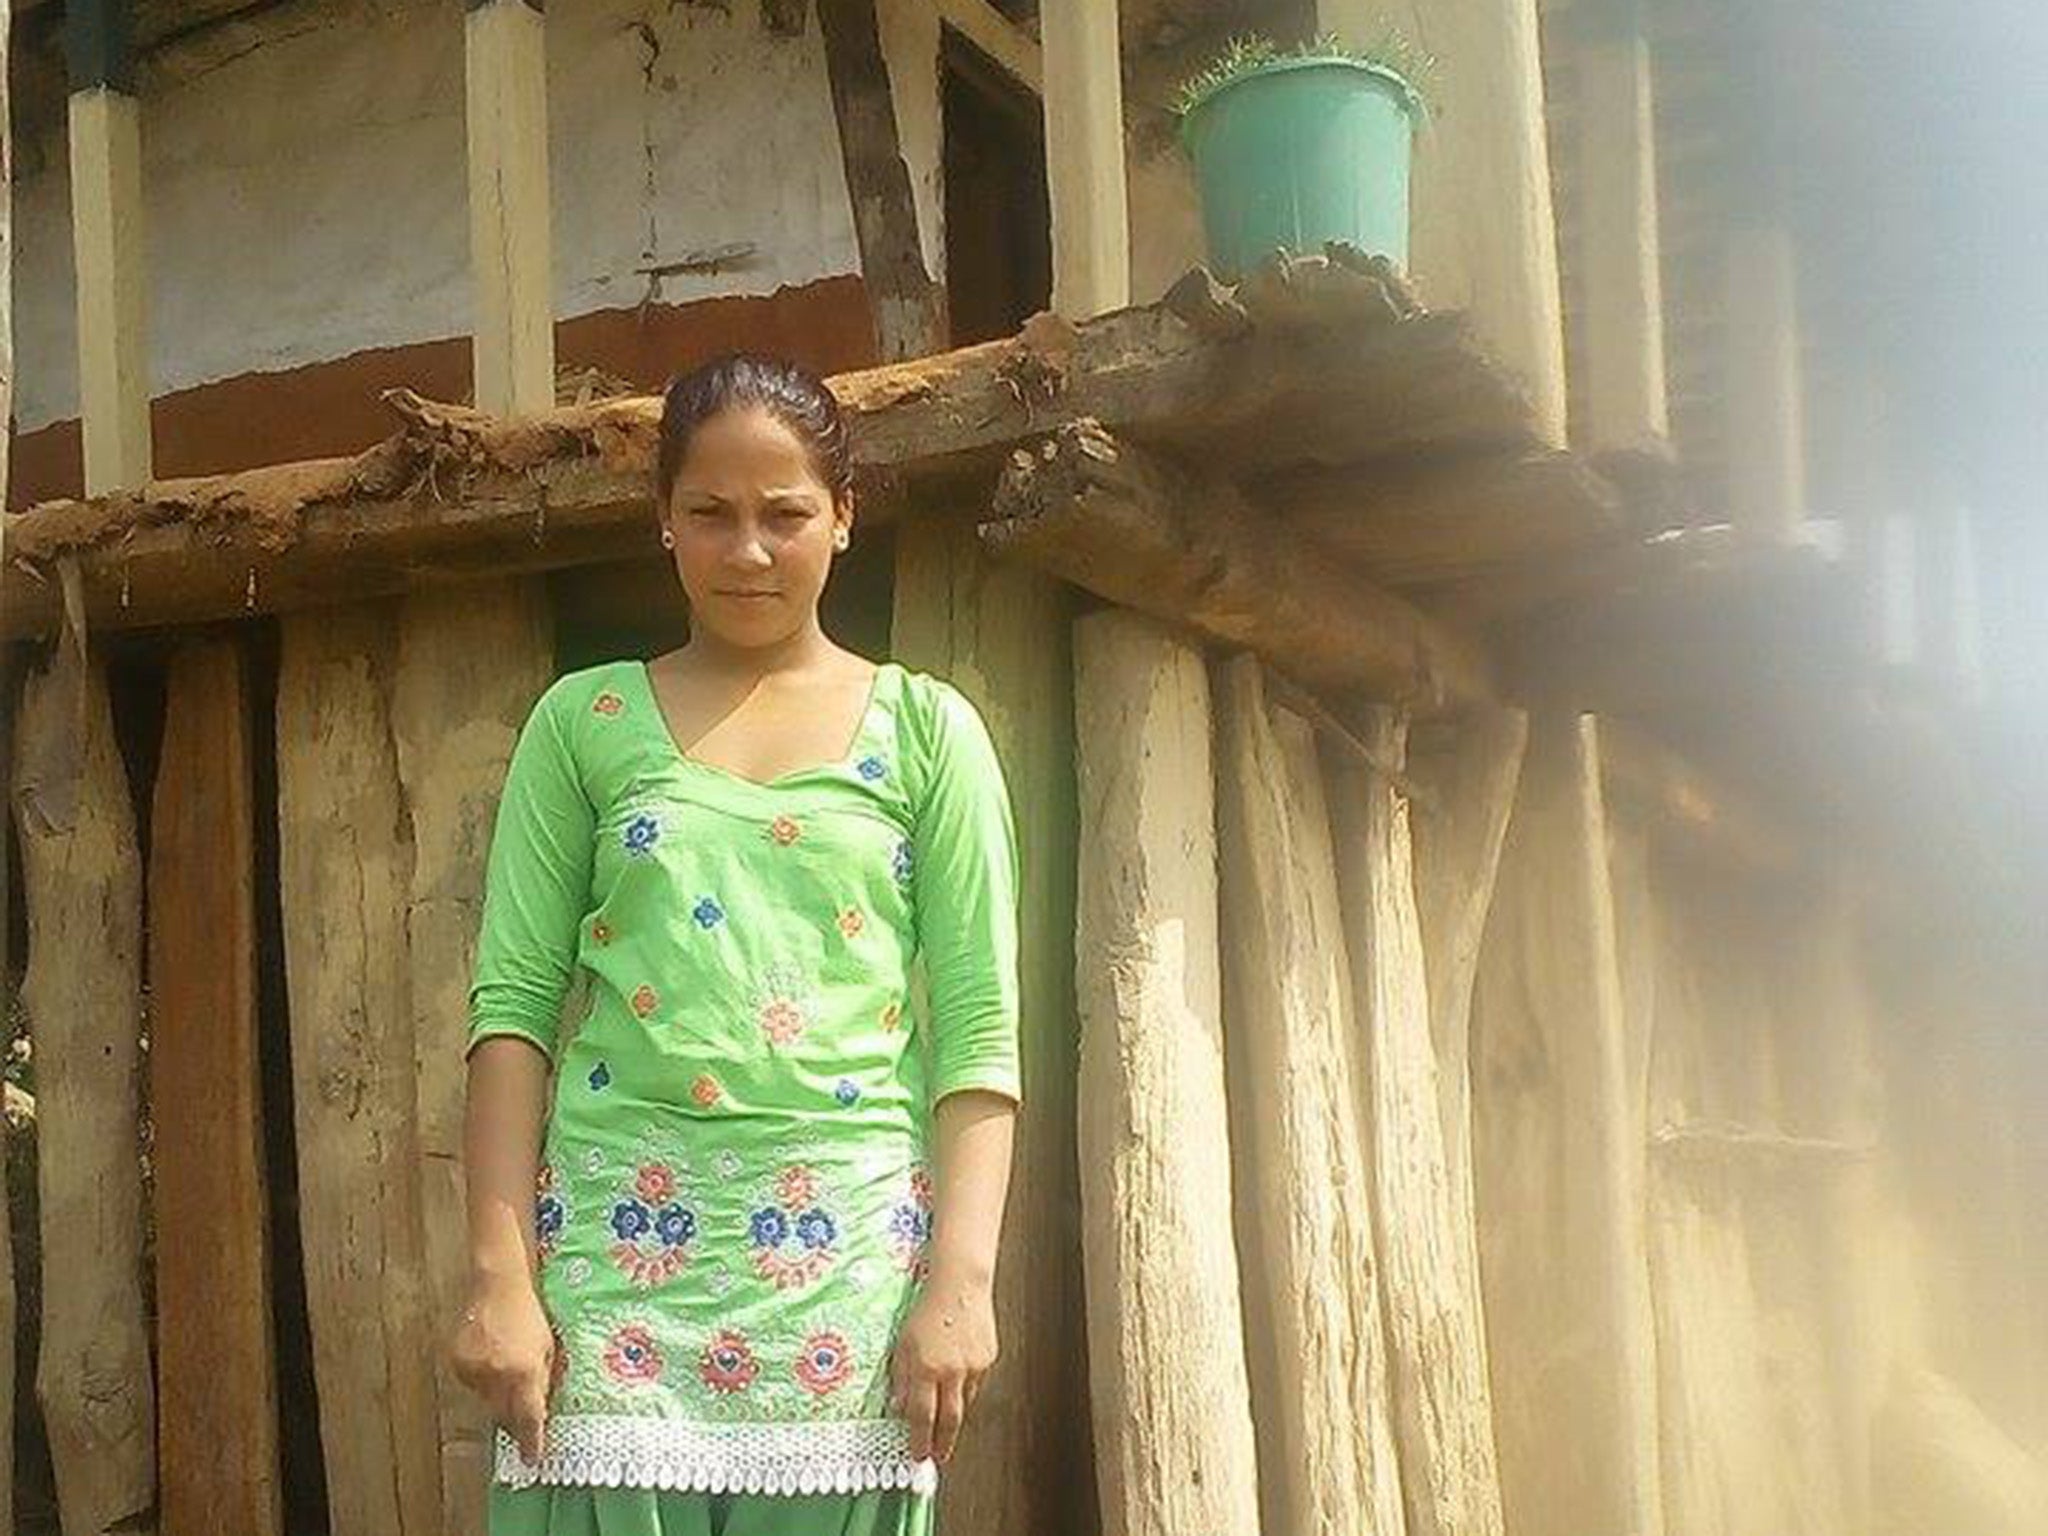 Kalpana, who lives in a rural village in Nepal, is confined to a menstrual hut during her period